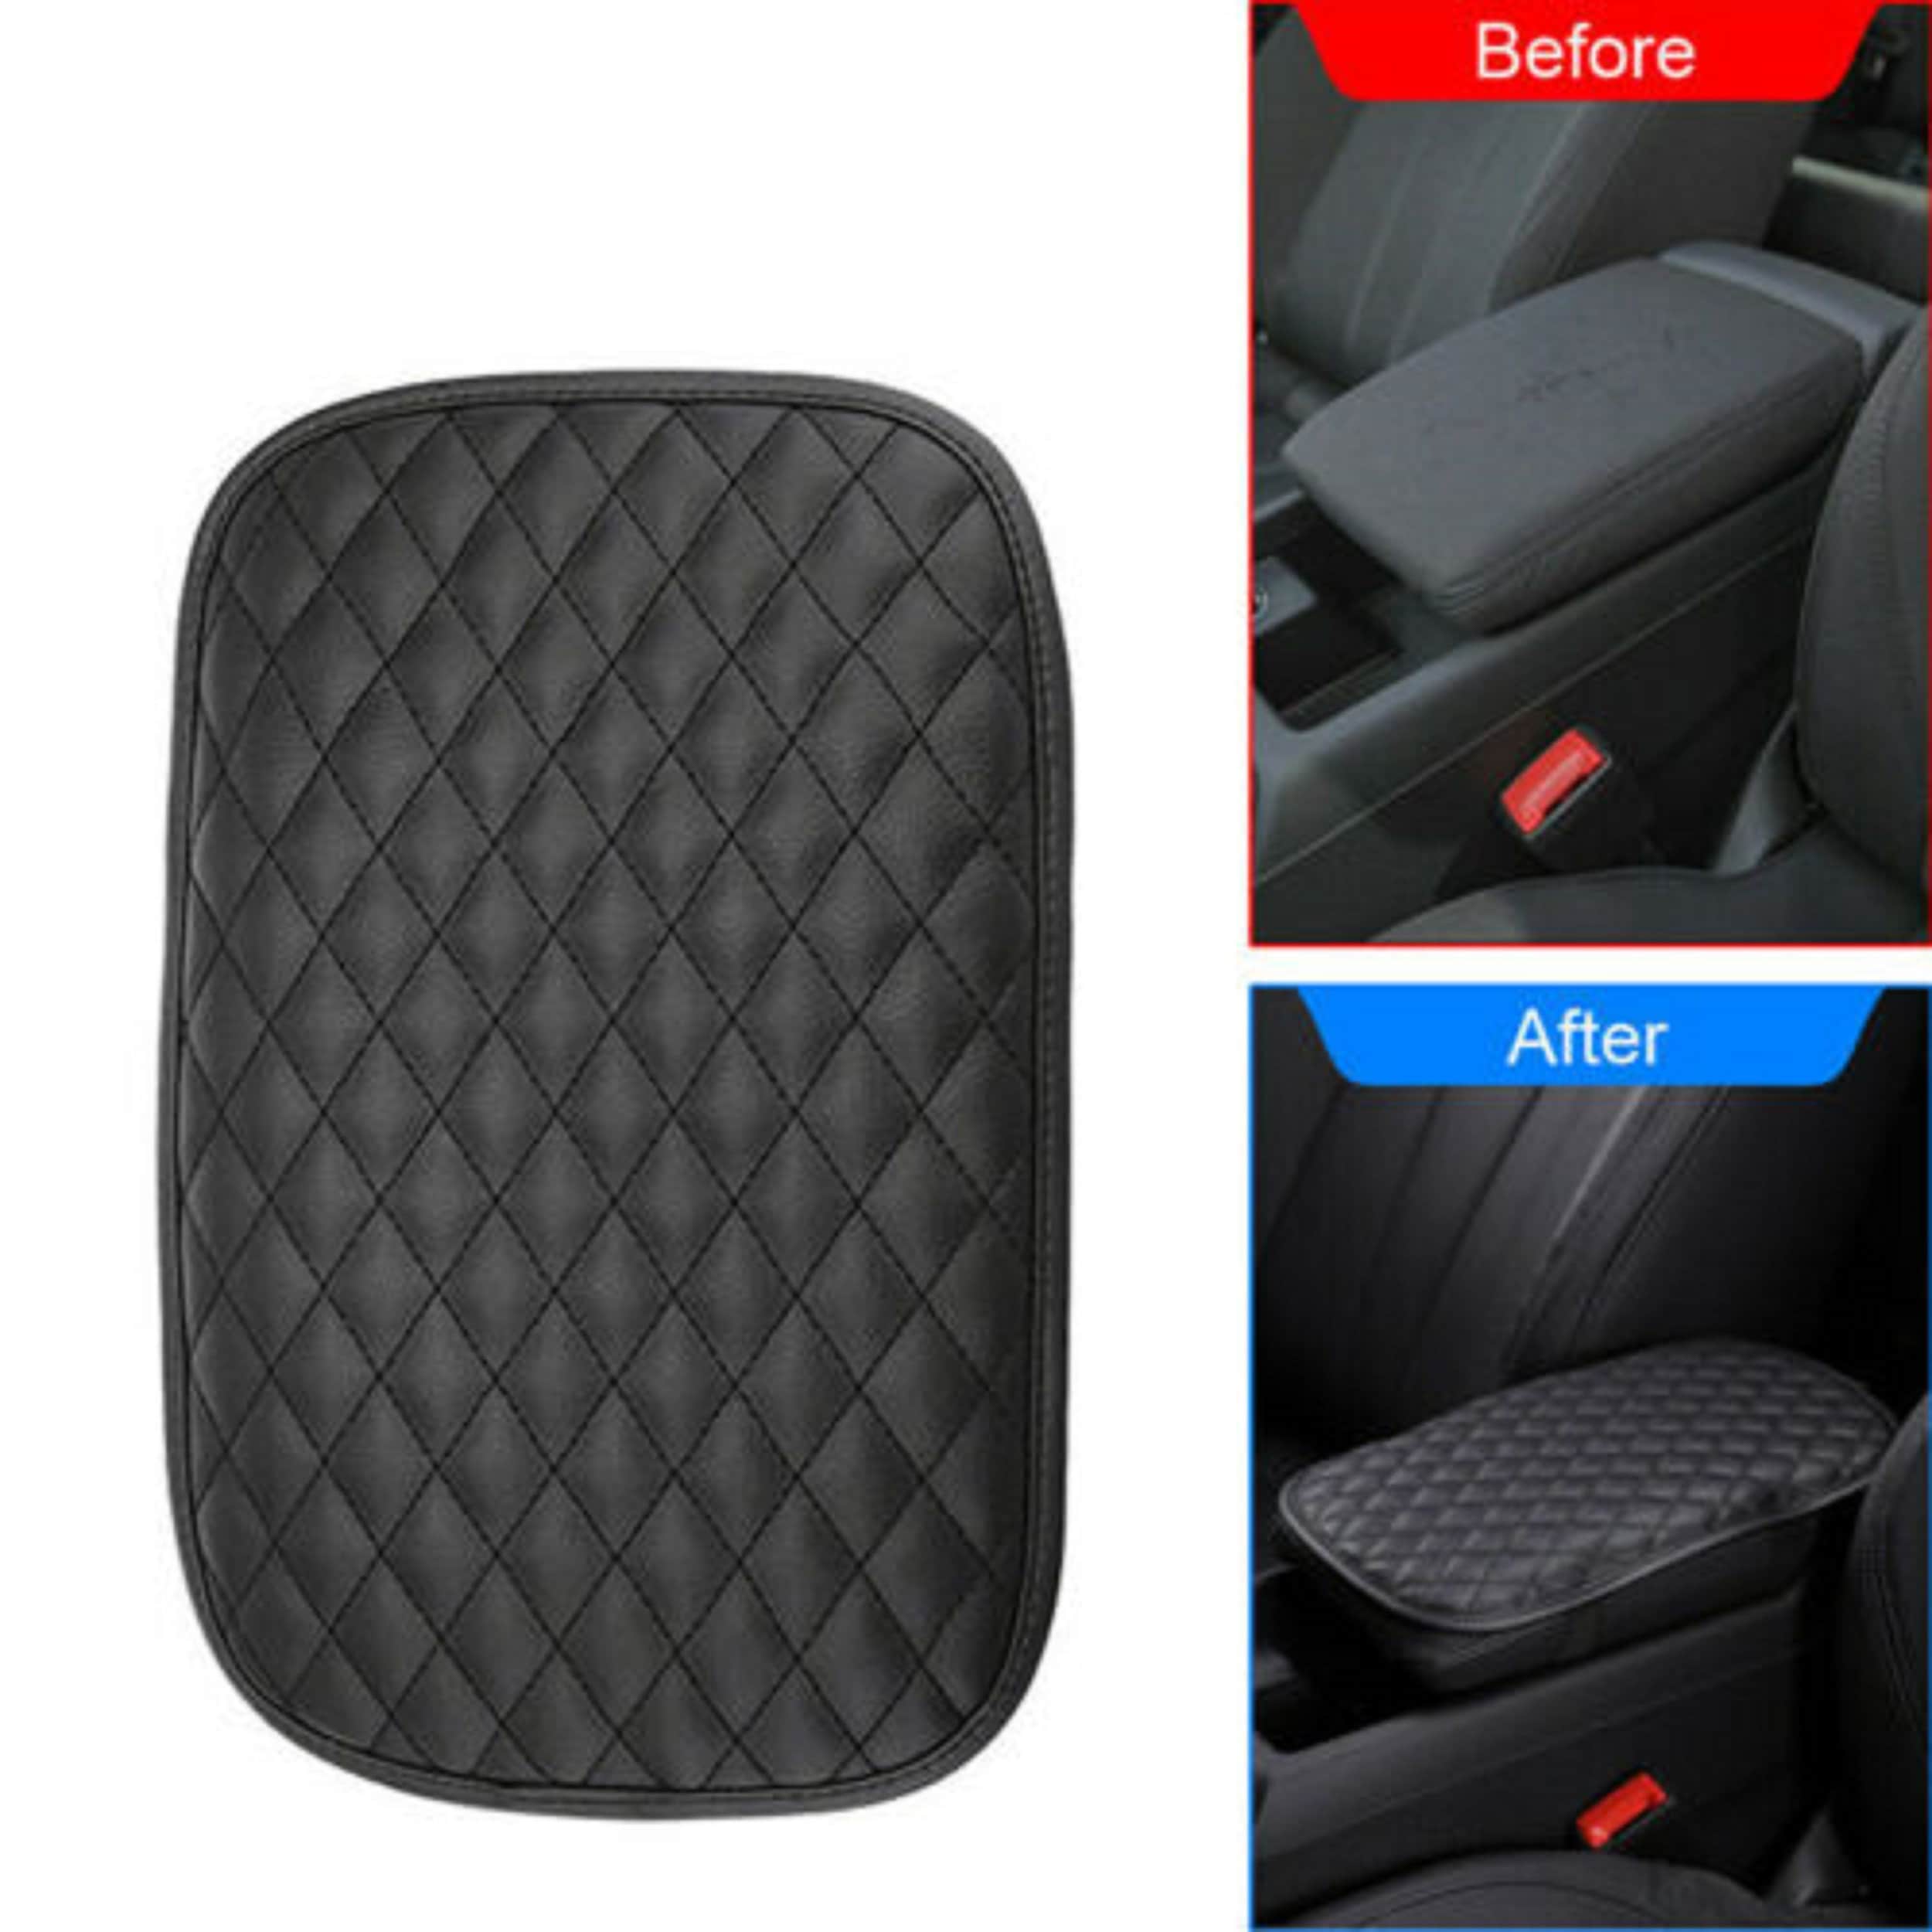 Valleycomfy Bling Bling Car Armrest Cover Universal Auto Center Console Cover Car Armrest Cushion Pads Armrest Protector with 2 Bling Car Cup Coasters for Vehicle SUV Truck Decor Black 